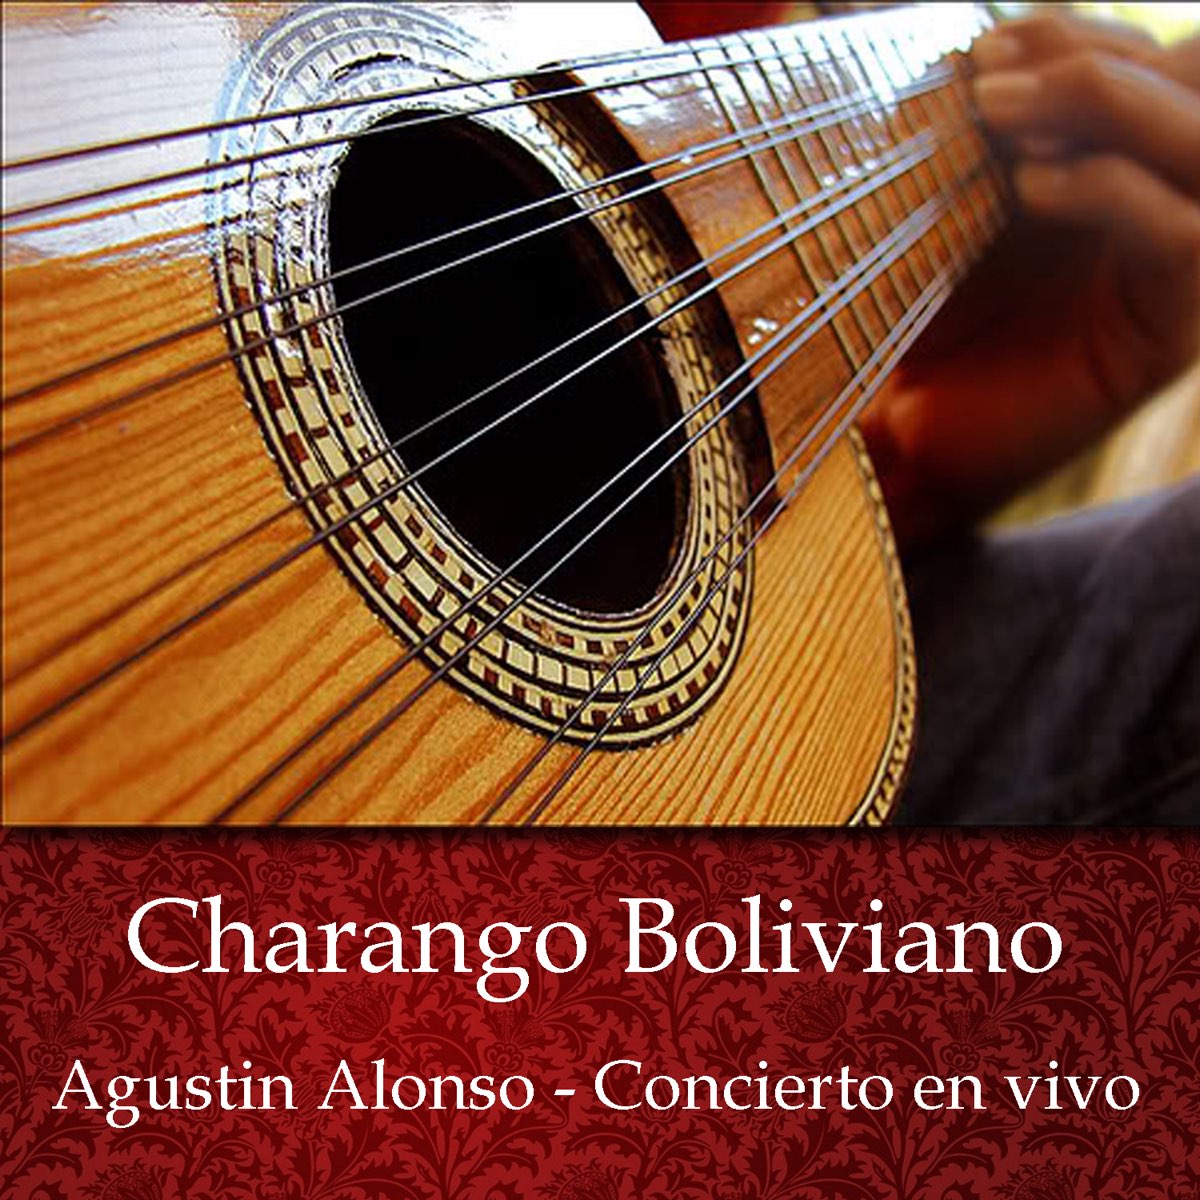 Charango Boliviano - Agustin Alonso by Agustin Alonso on Apple Music